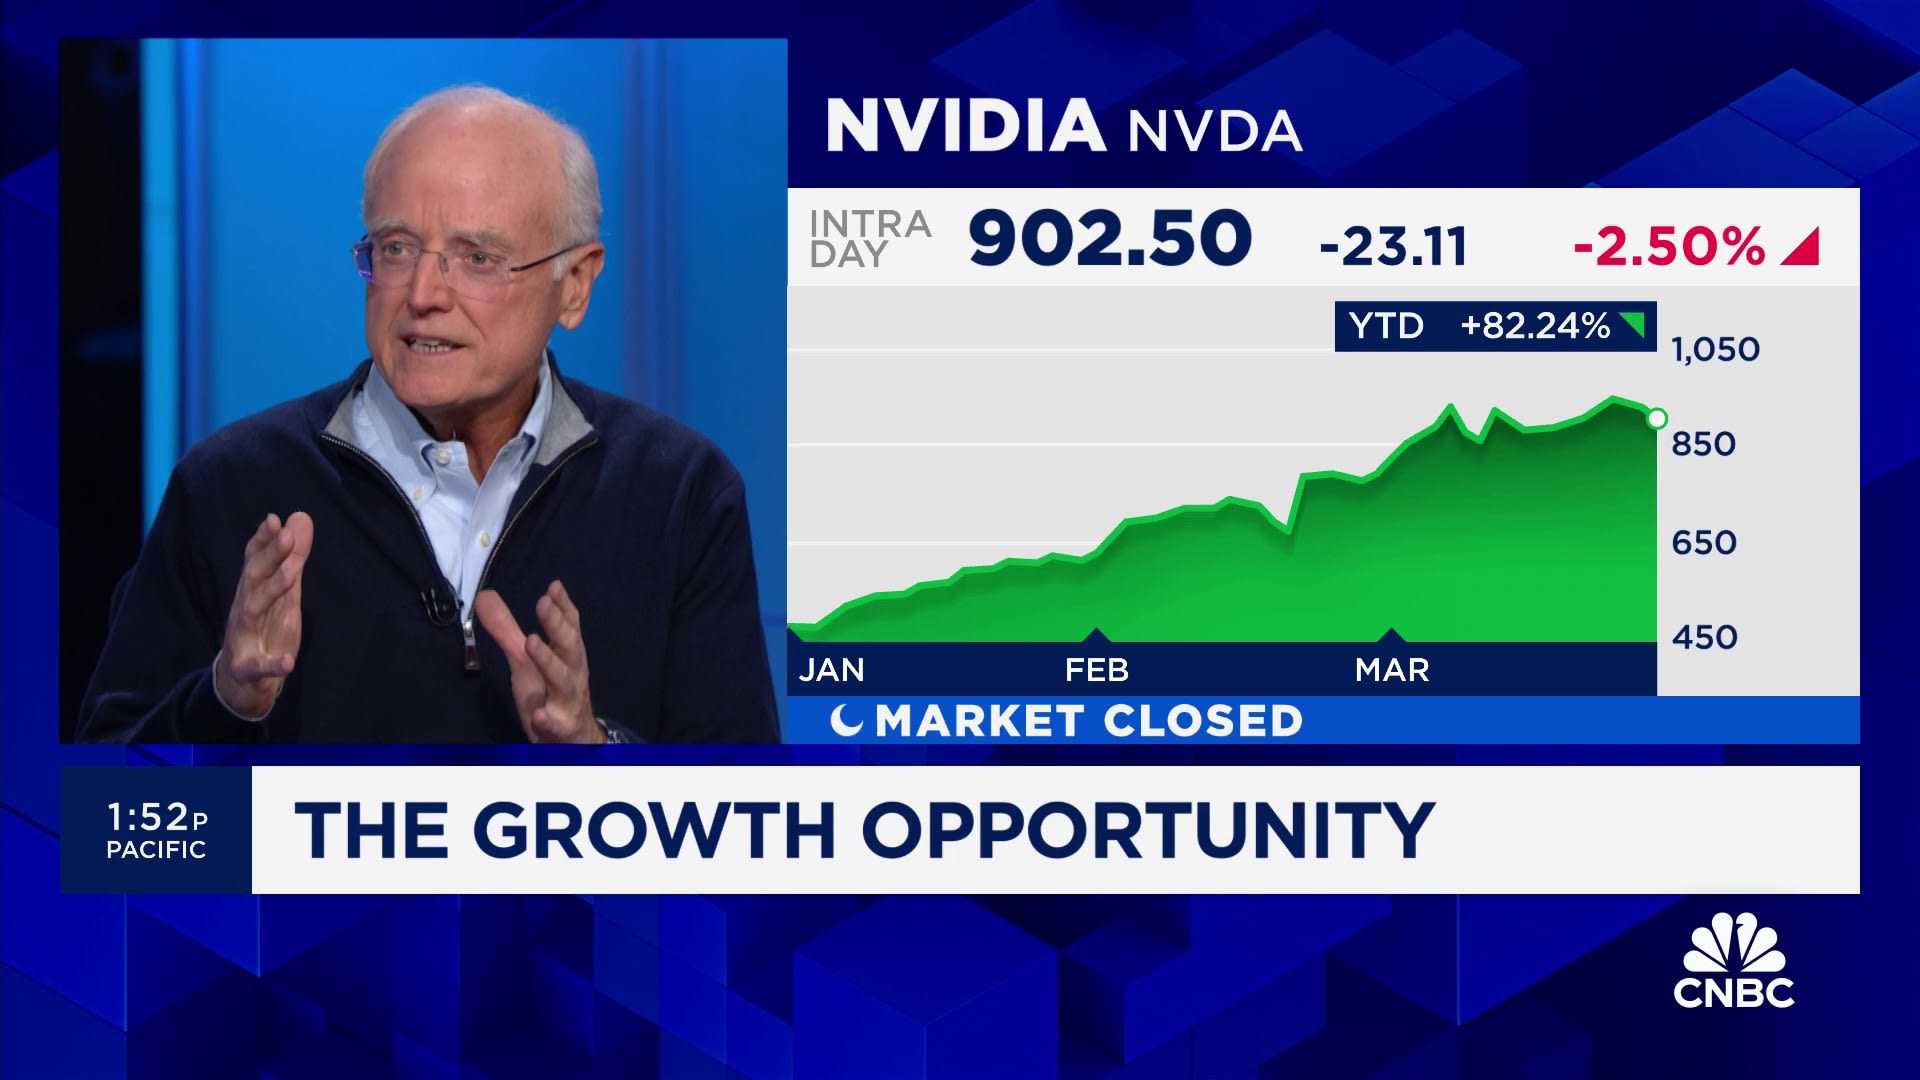 Nvidia is experiencing a once in a generation tech advancement, says Gabelli's Howard Ward